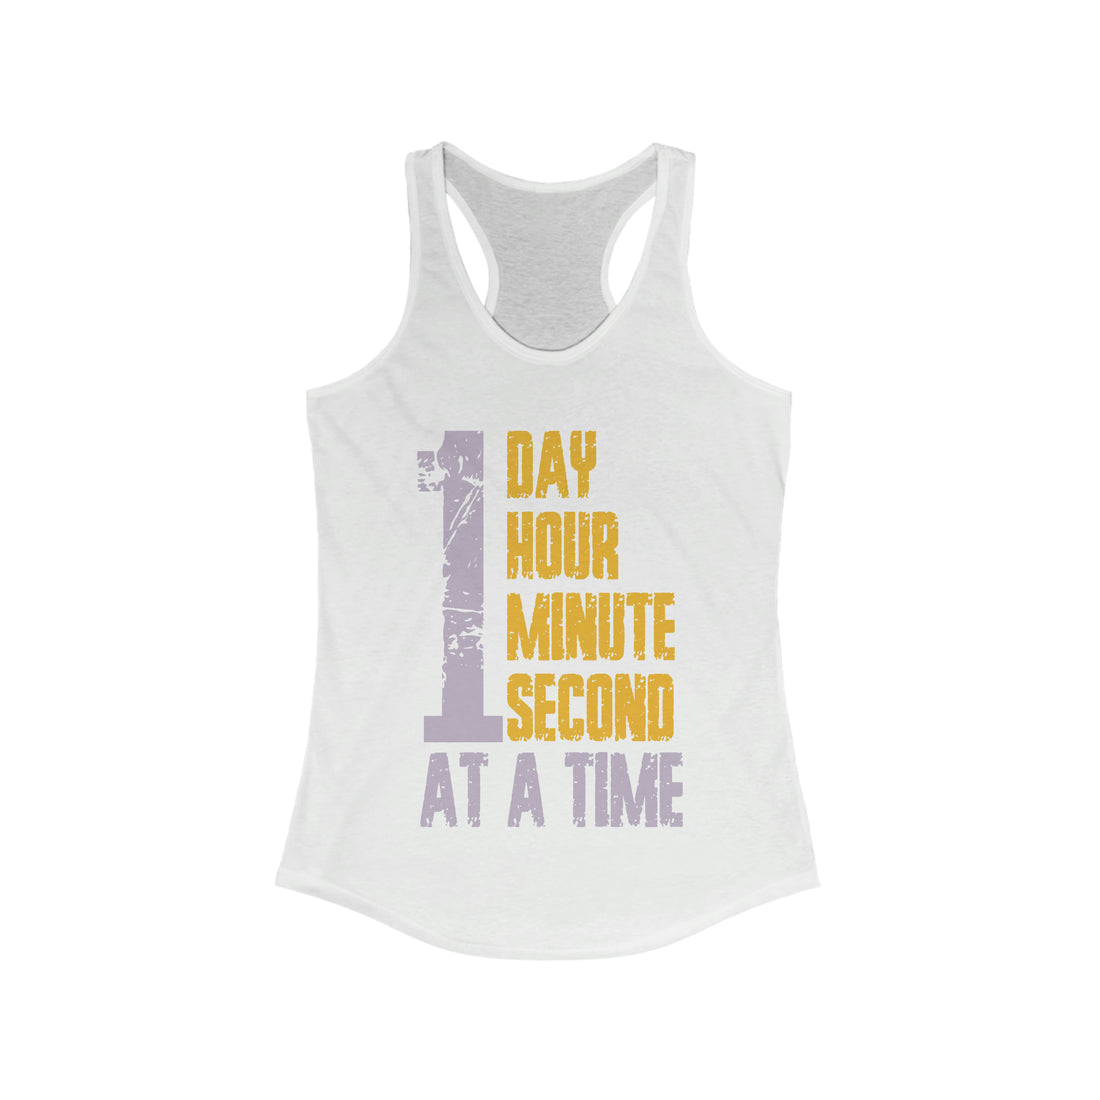 1 Day Hour Minute Second At A Time - Racerback Tank Top